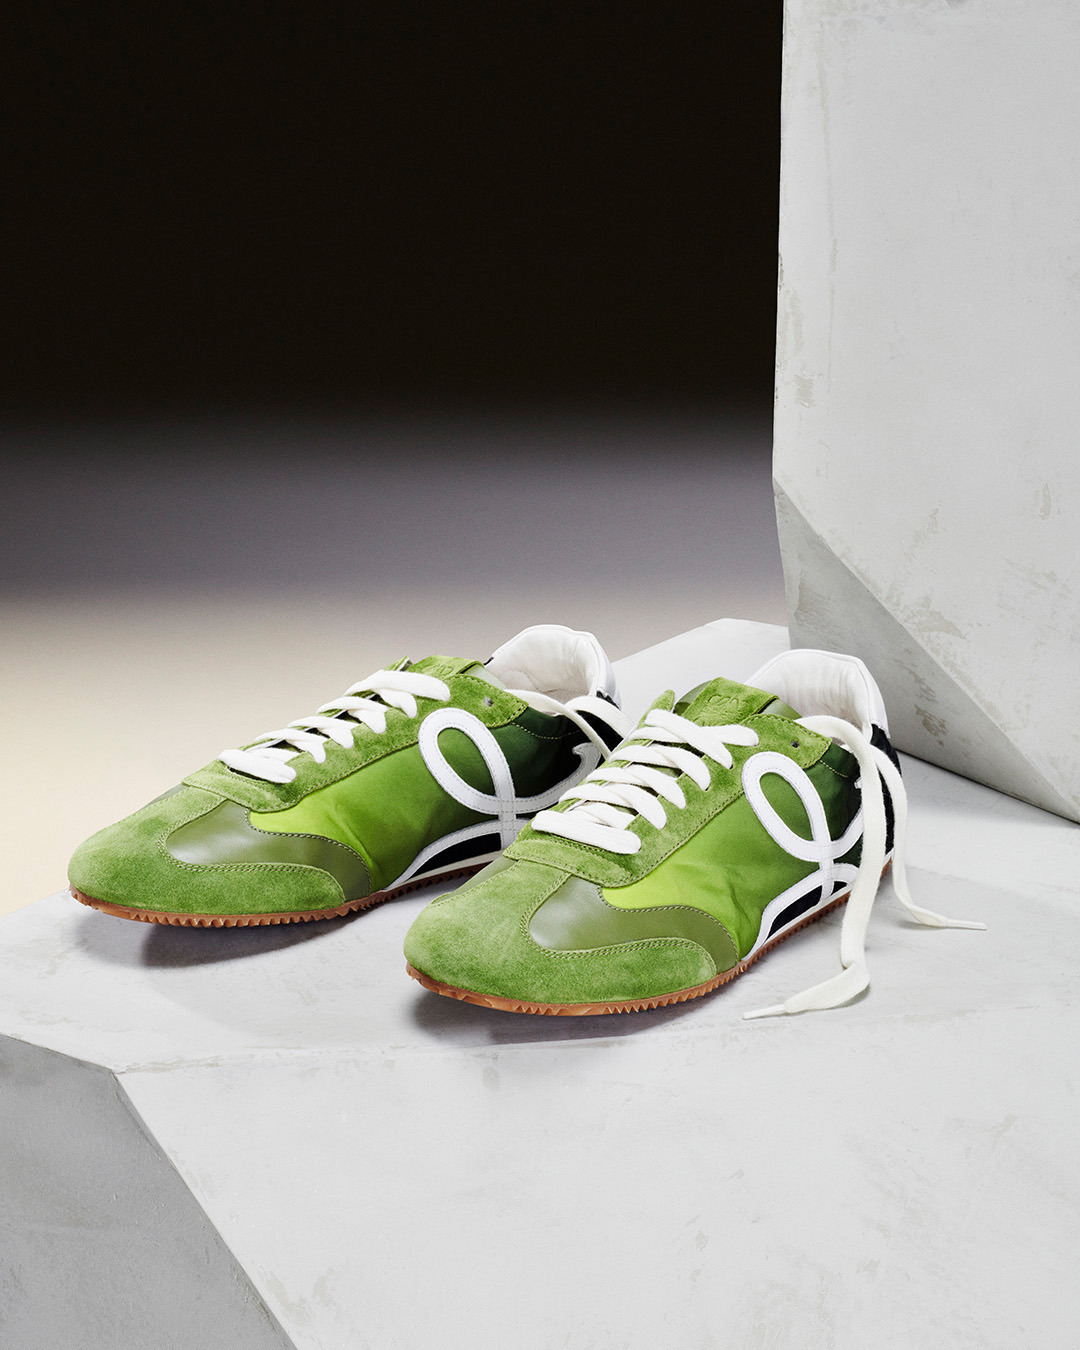 LOEWE - The Ballet Runner arrives in new colourways.

A lightweight sneaker with supple sole and elasticated sides combining the construction of a ballet pump with the style of a 1970s track shoe.

Av...